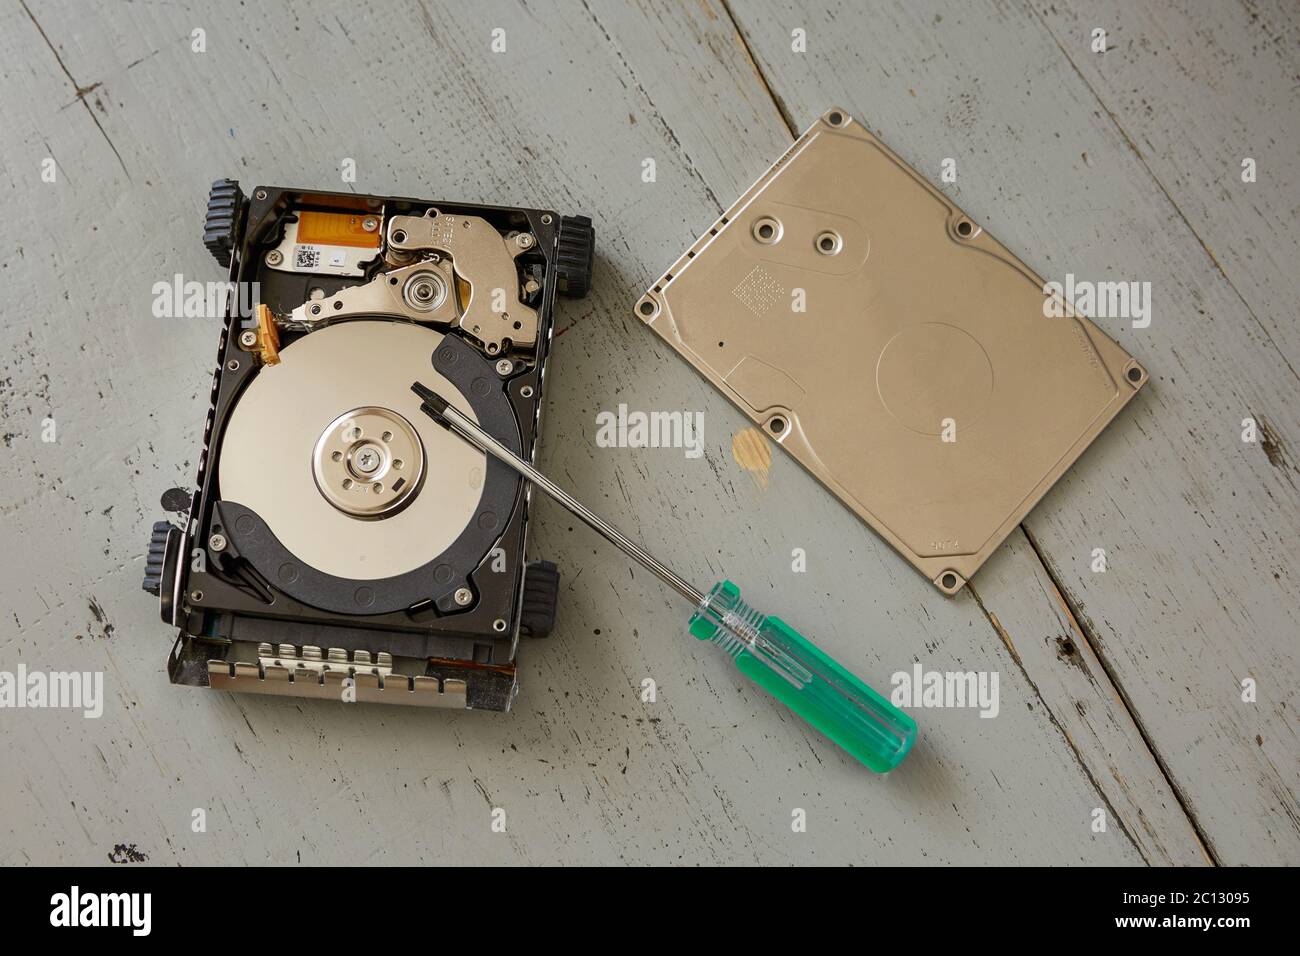 Broken and Destroyed Hard Drive Disk and Tools on Wooden Table Stock Photo